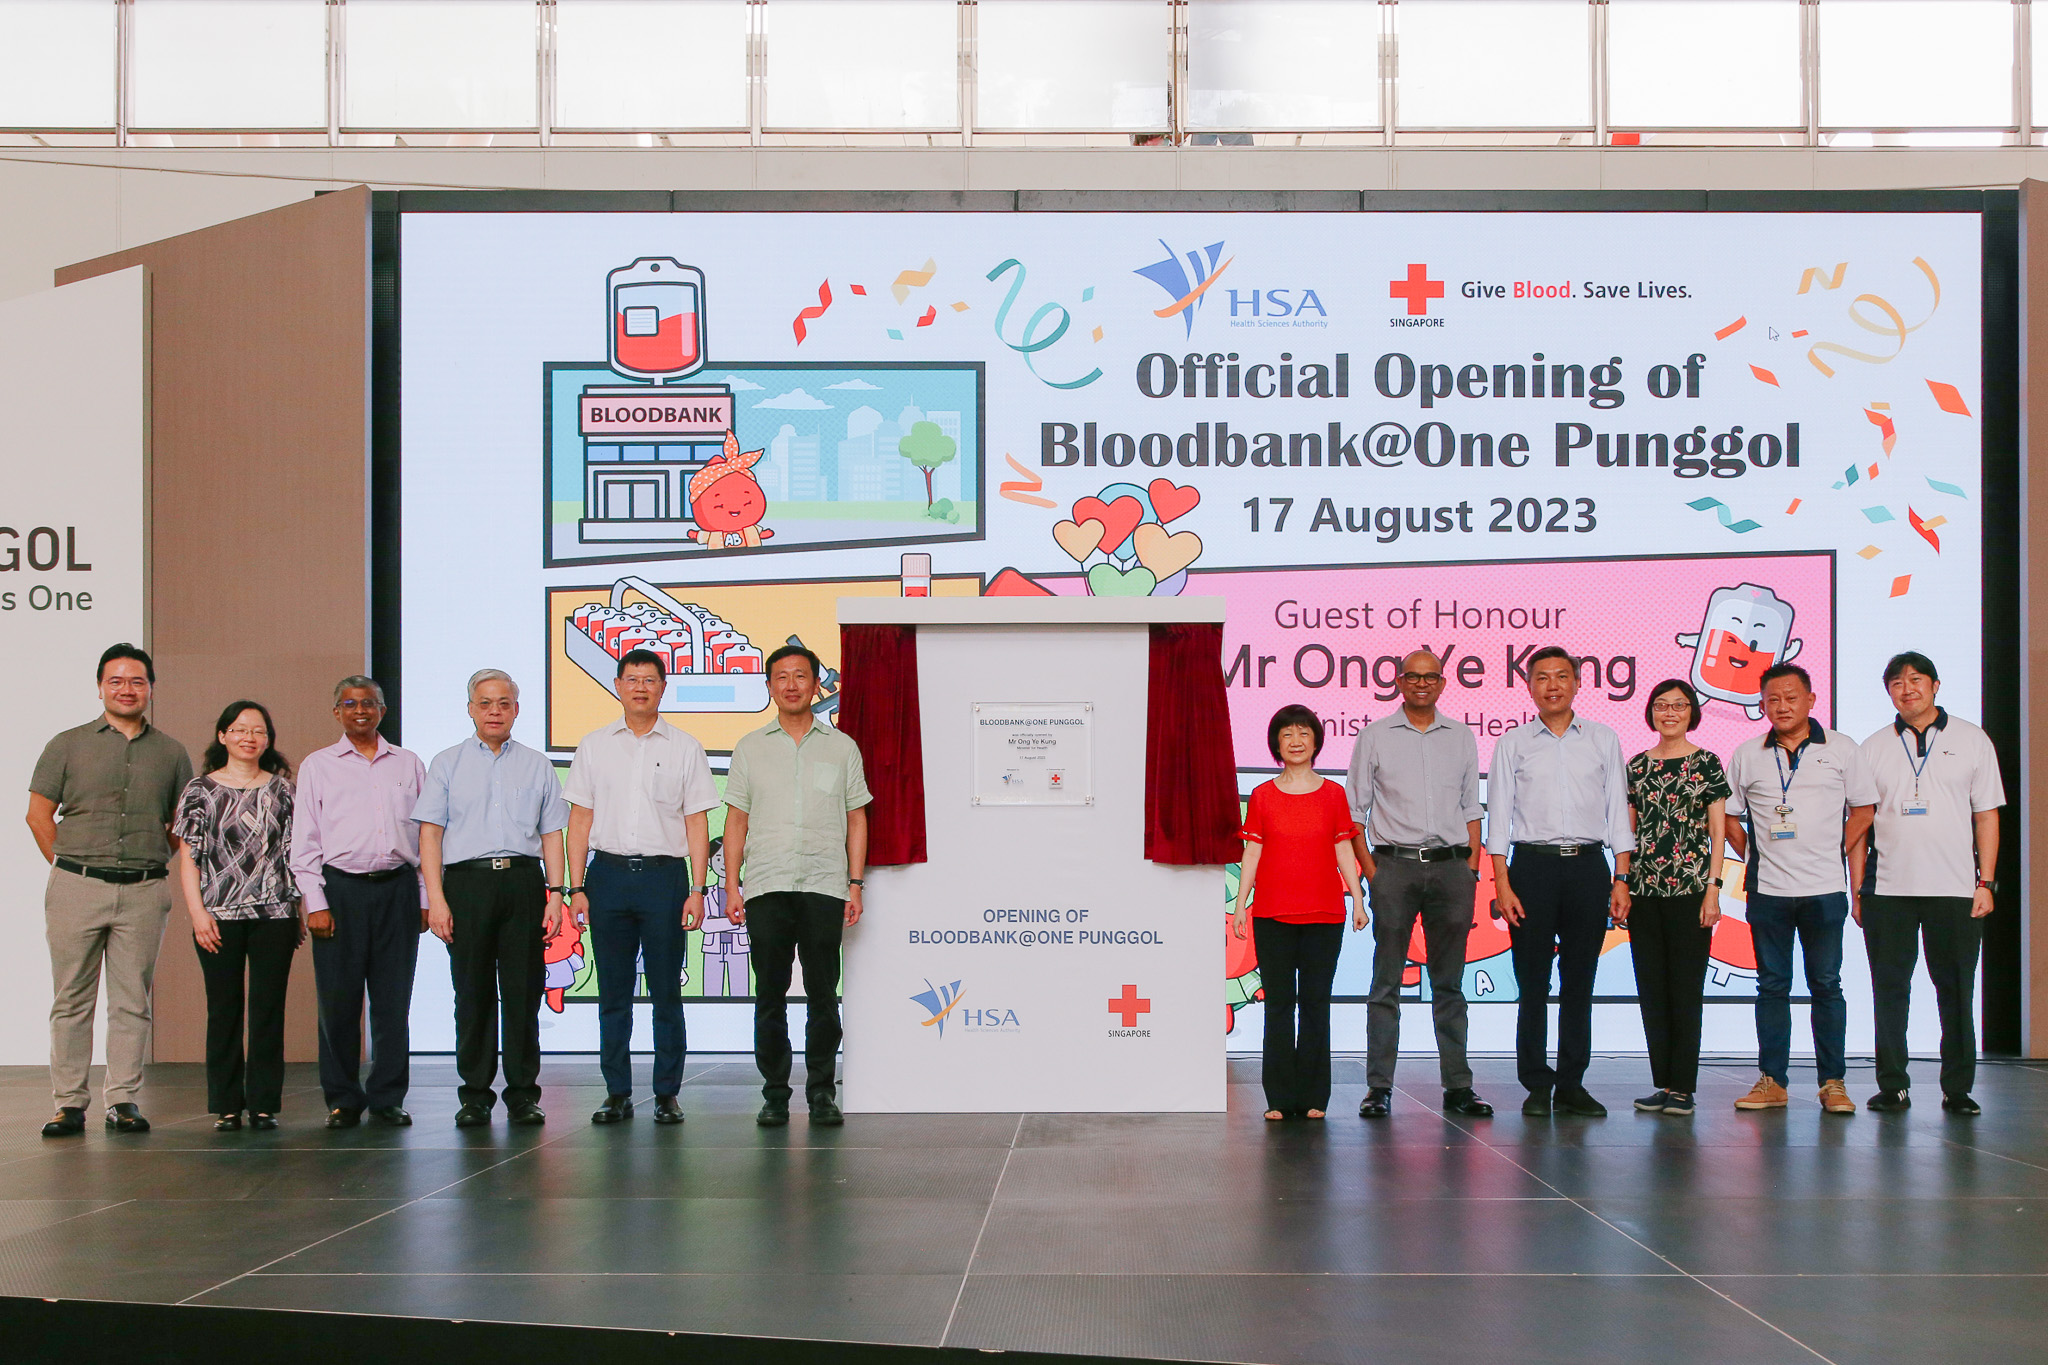 Bloodbank One Punggol Opening 17 Aug 23 group stage